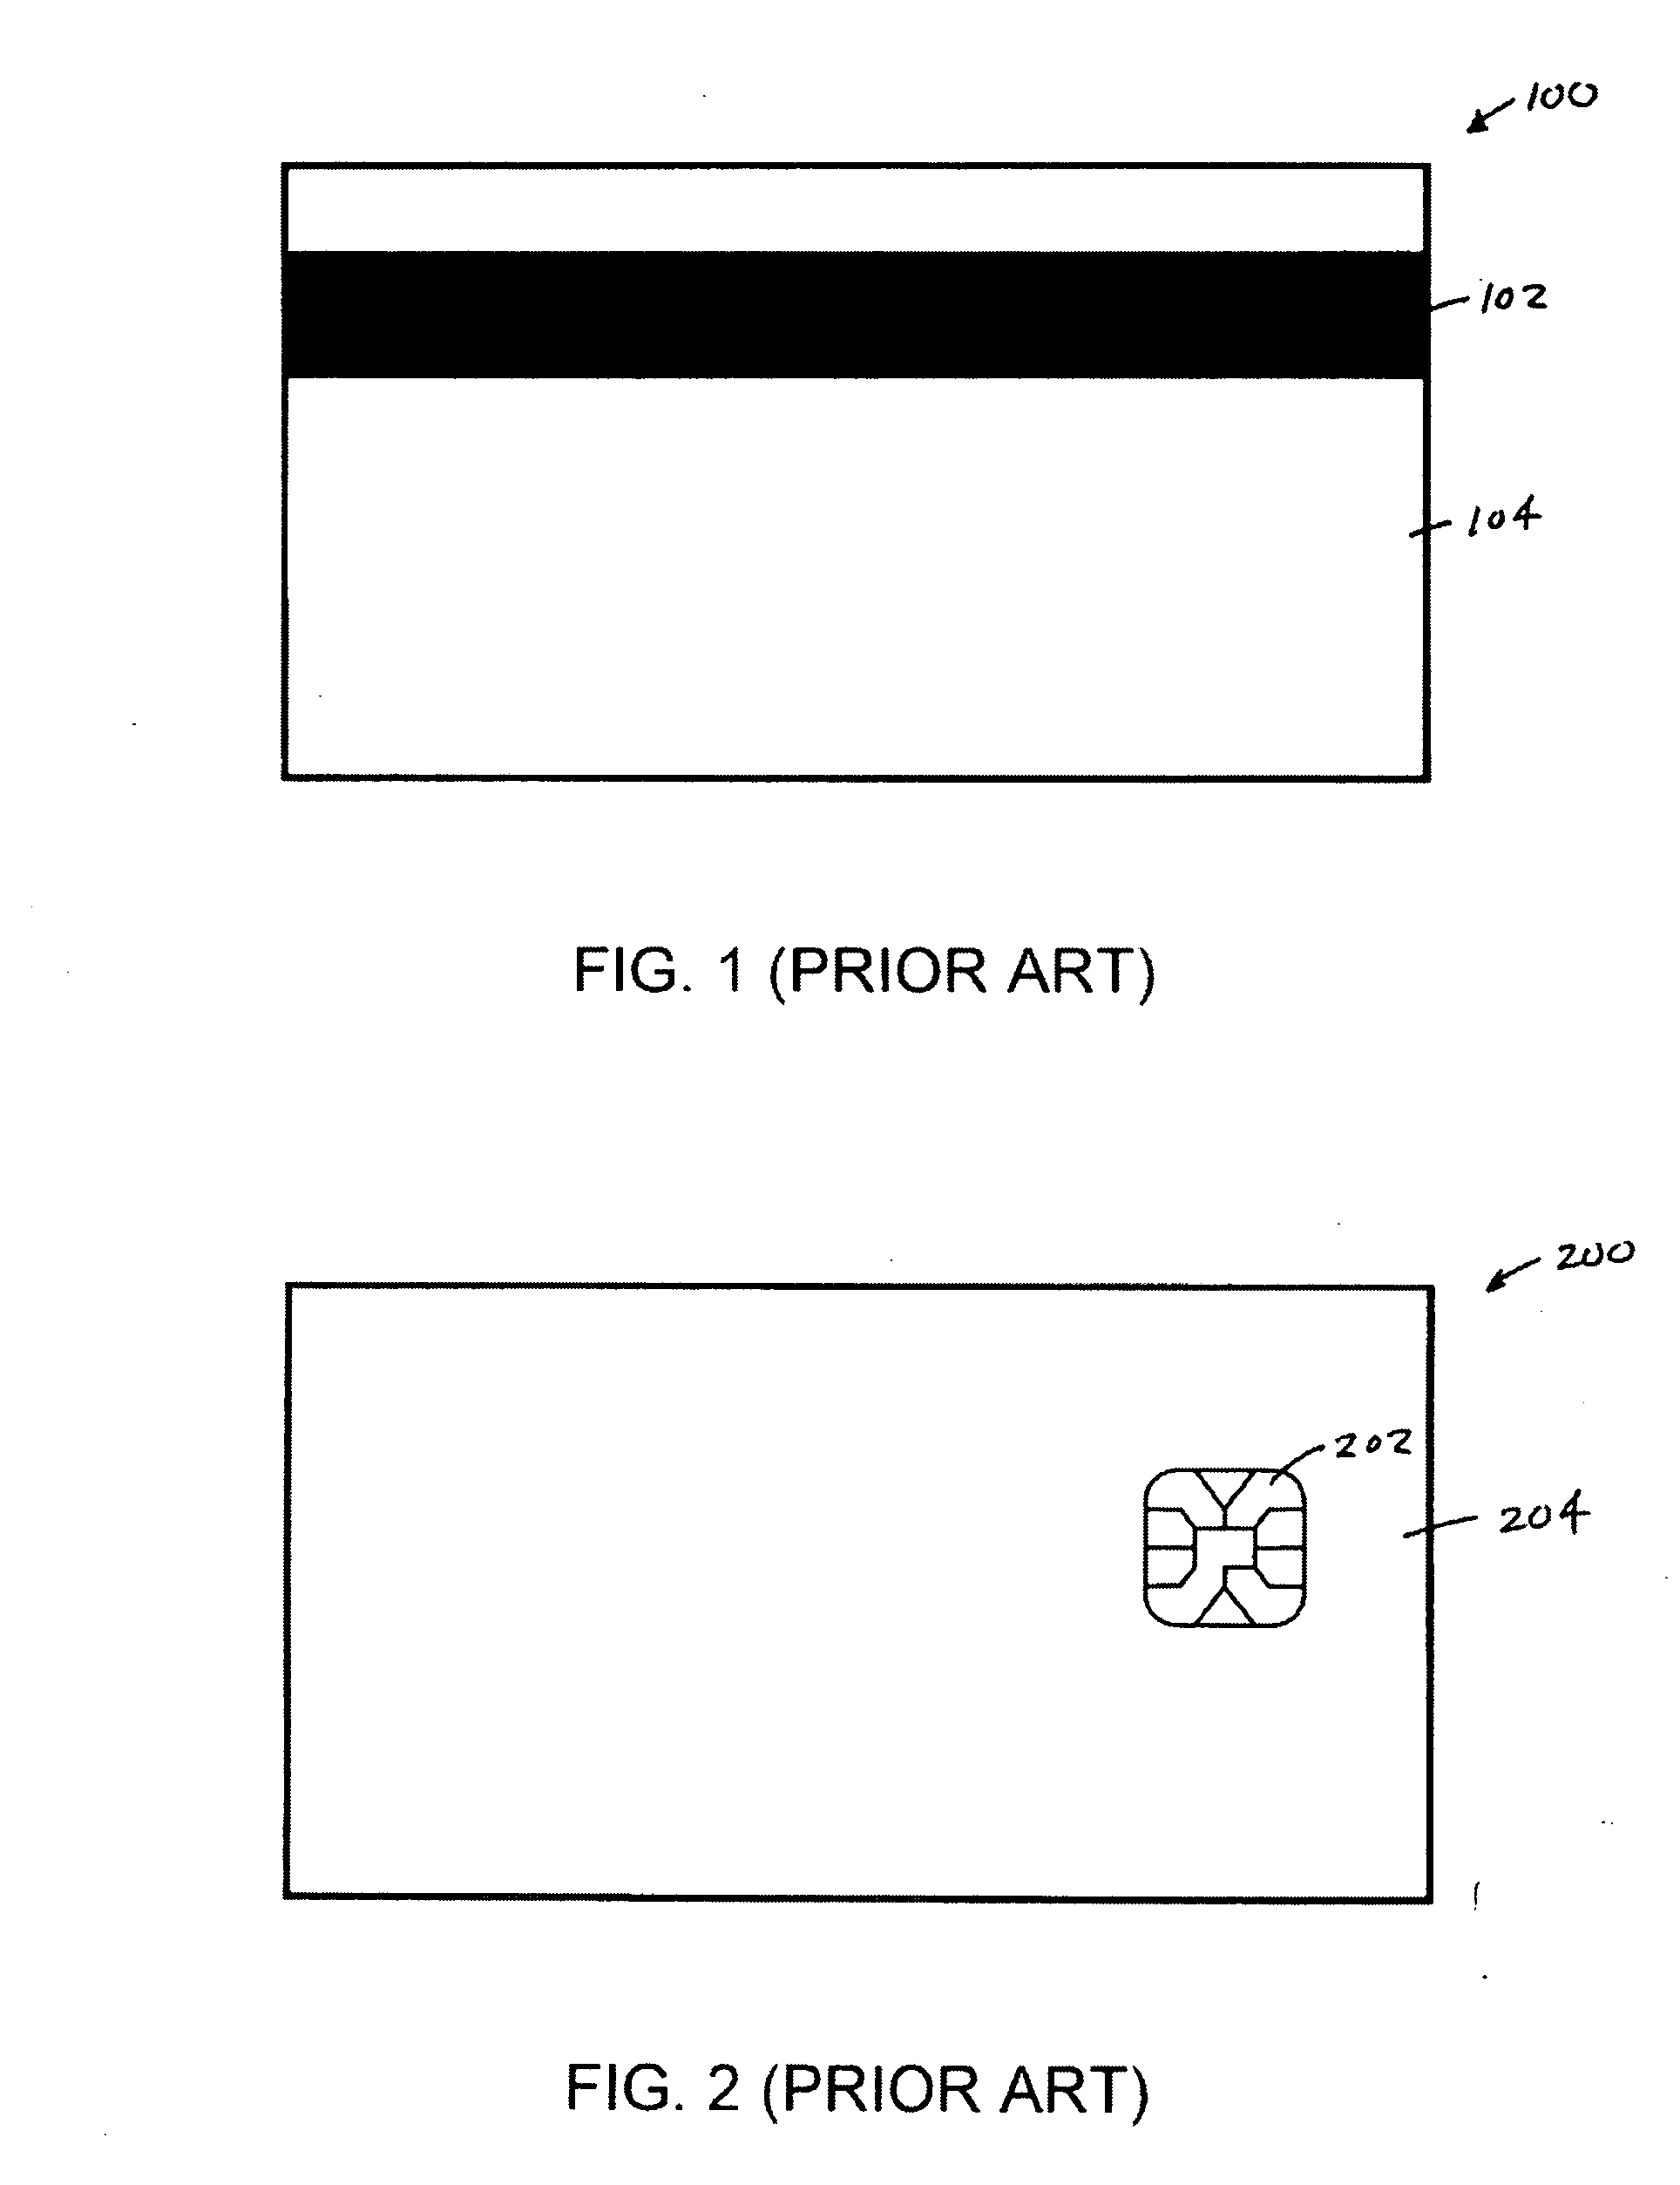 System, method and apparatus for enabling transactions using a user enabled programmable magnetic stripe